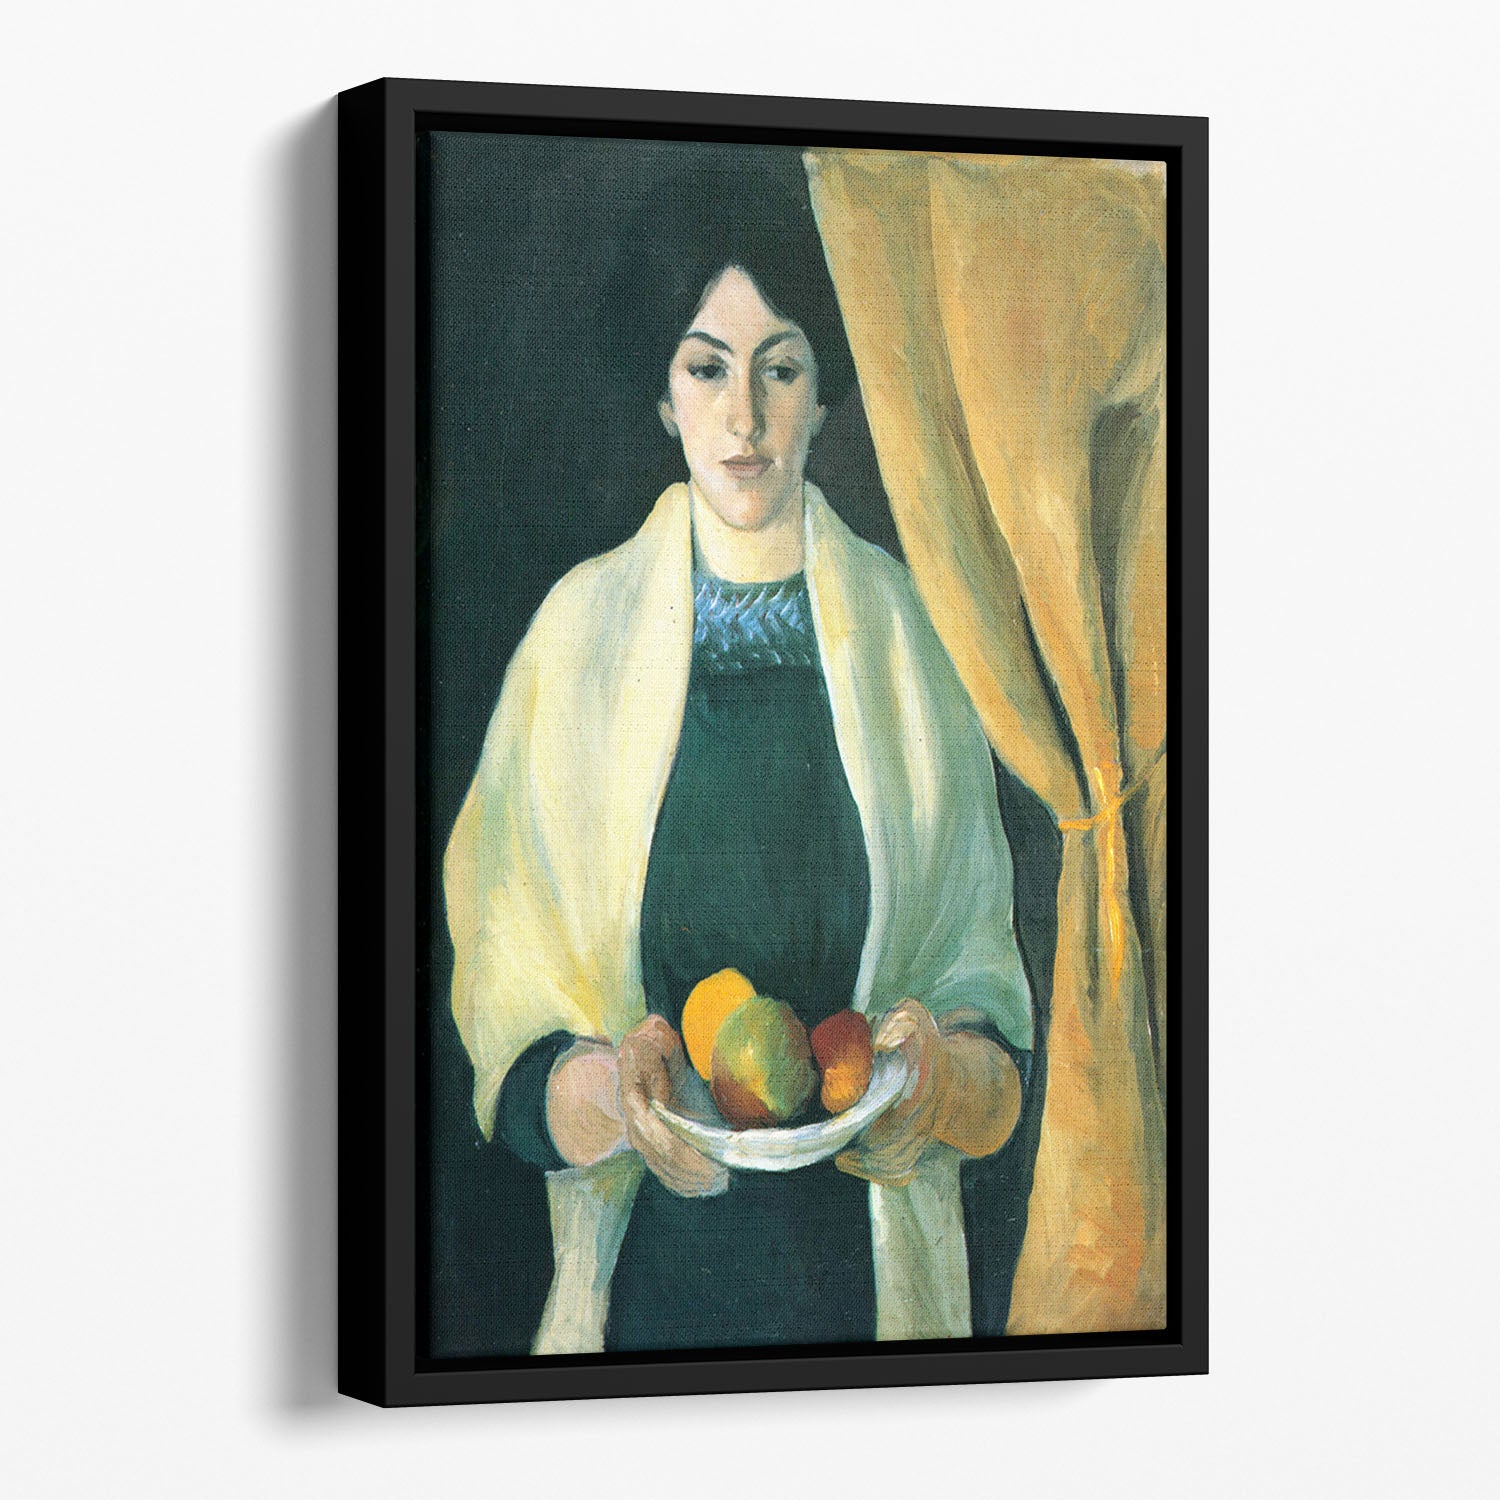 Portrait with apples portrait of the wife of the artist by Macke Floating Framed Canvas - Canvas Art Rocks - 1